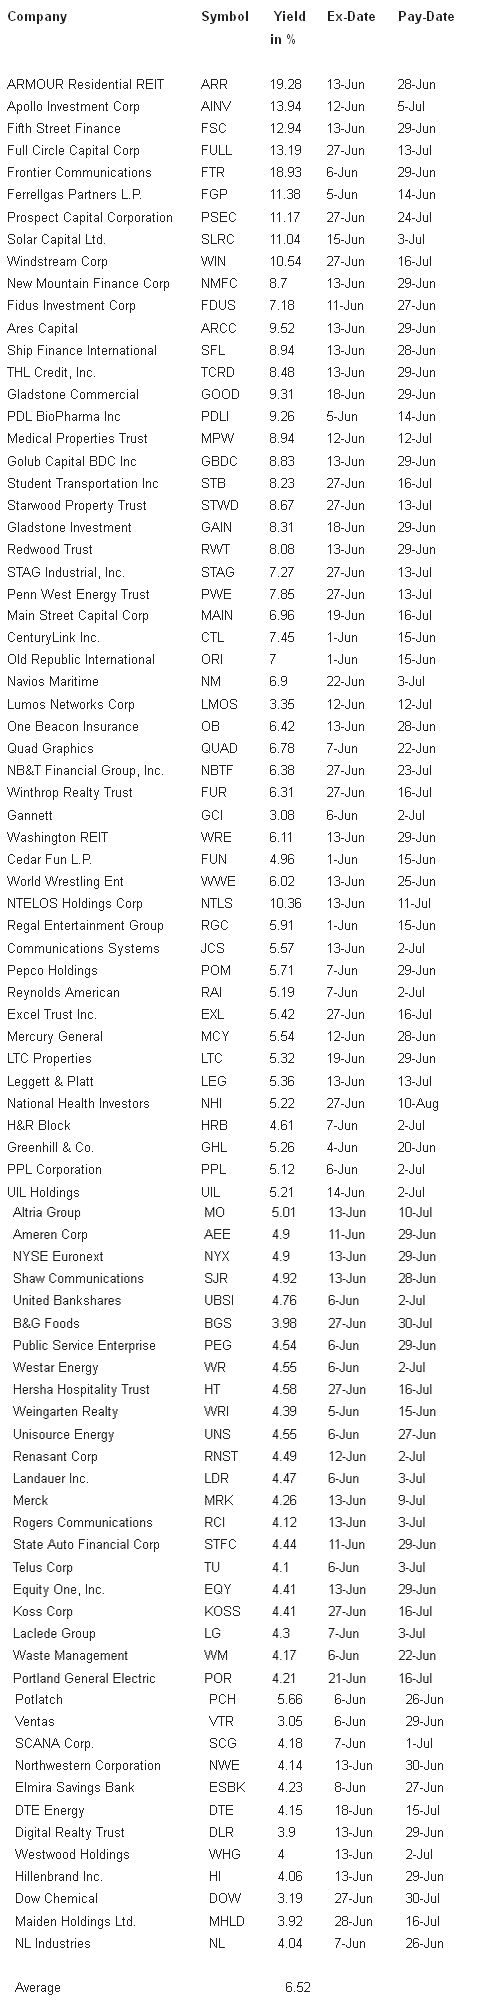 High Yield Stocks With Ex-Dividend Date June 2012